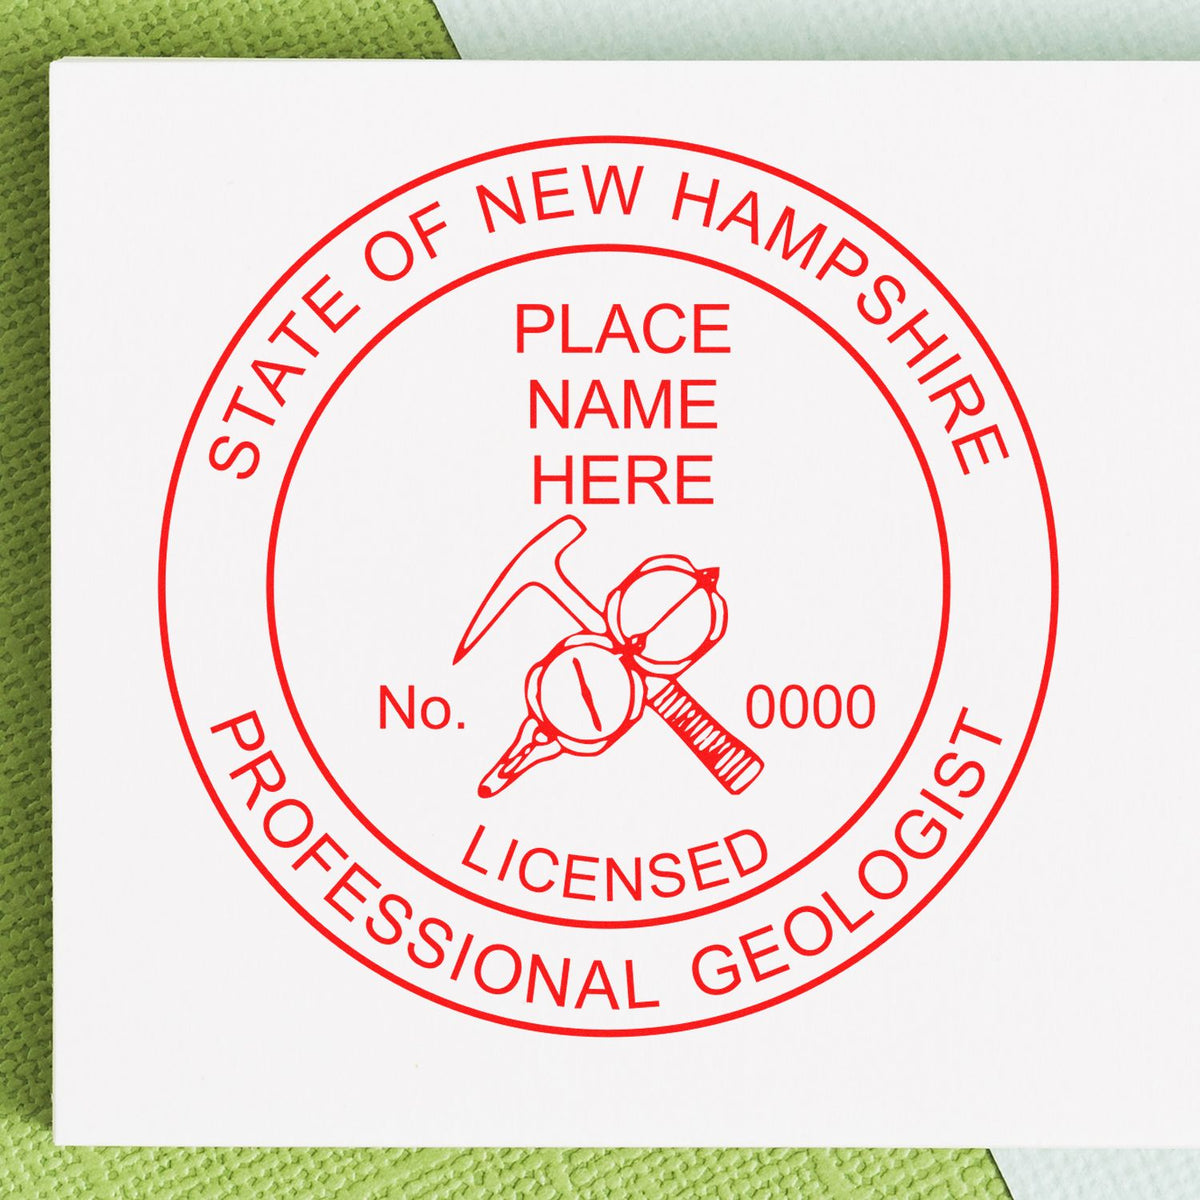 The Premium MaxLight Pre-Inked New Hampshire Geology Stamp stamp impression comes to life with a crisp, detailed image stamped on paper - showcasing true professional quality.